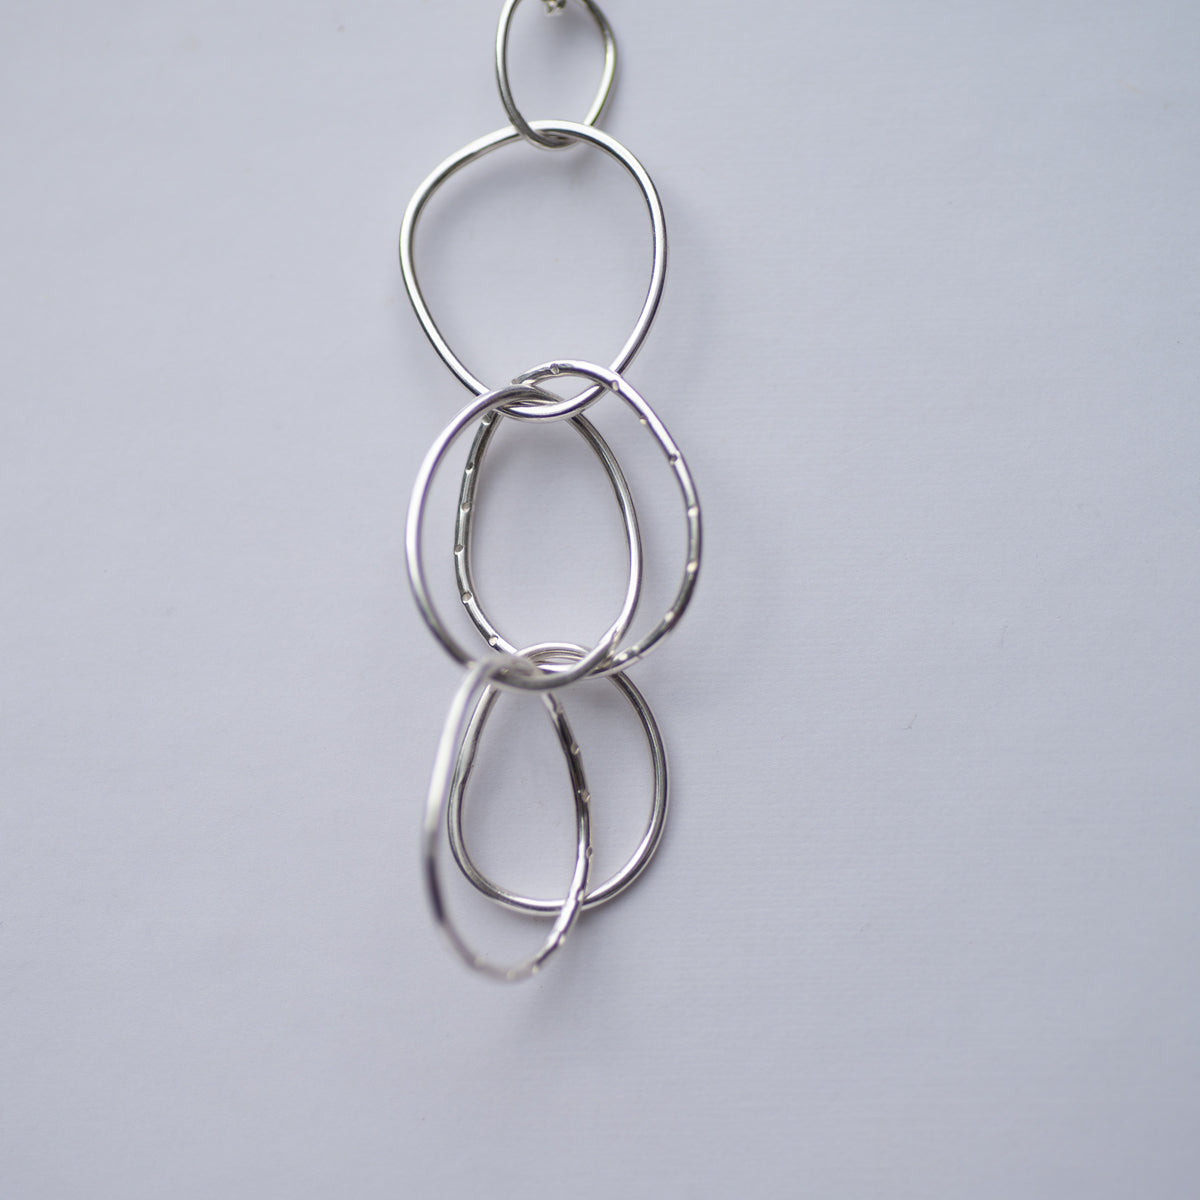 Sky Collection Linked Loop Necklace